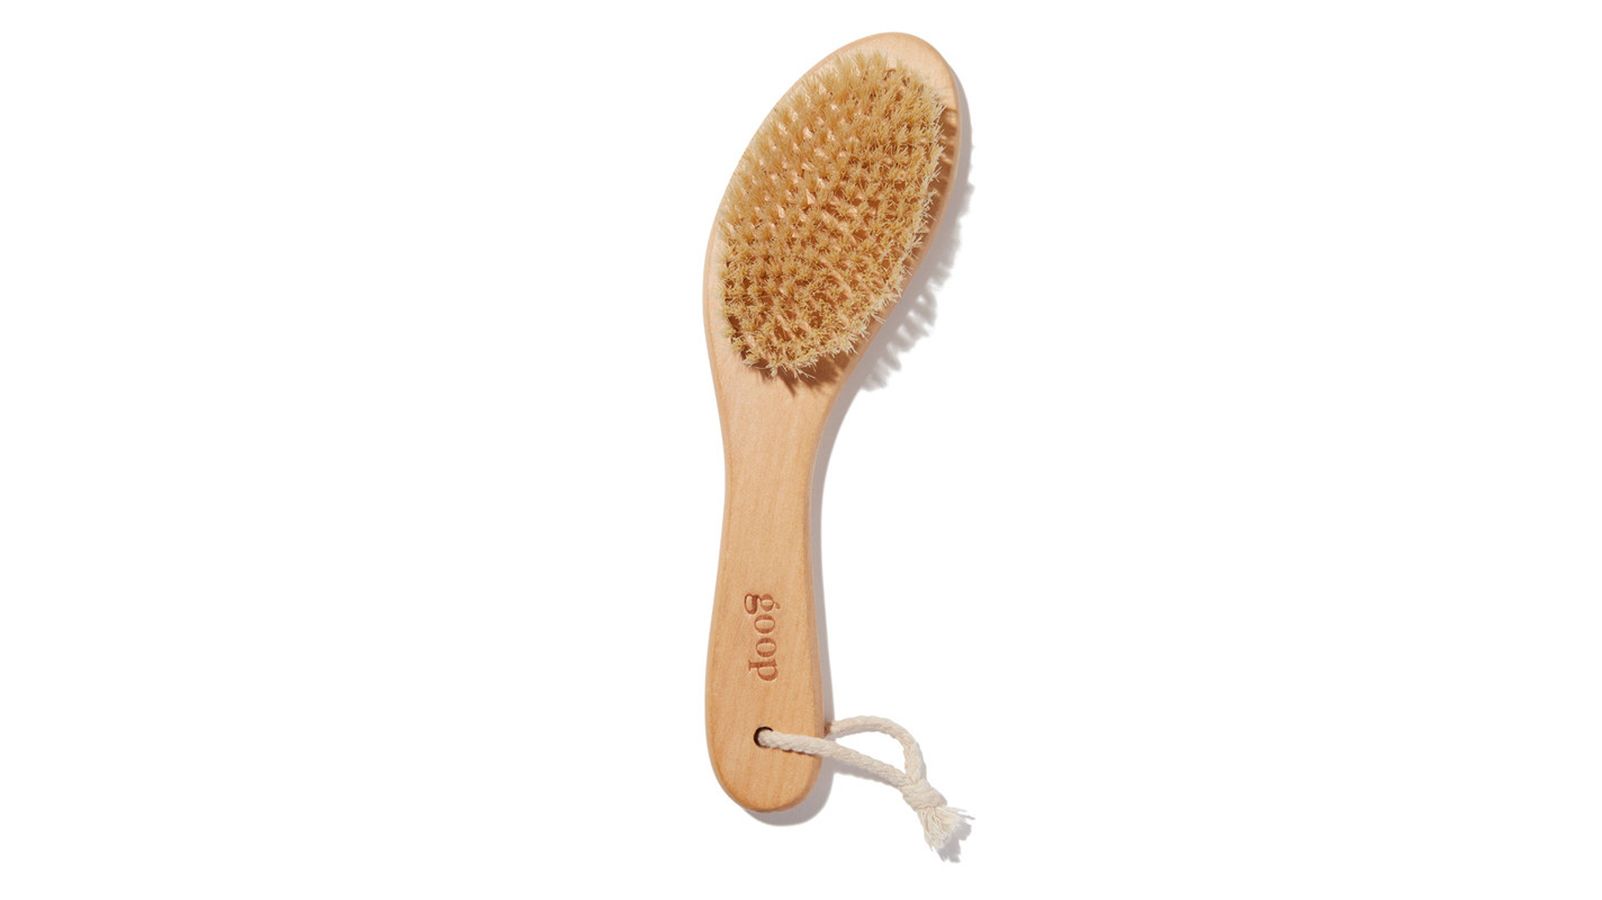 Dry Brushing Benefits and How to Try It, According to Pros